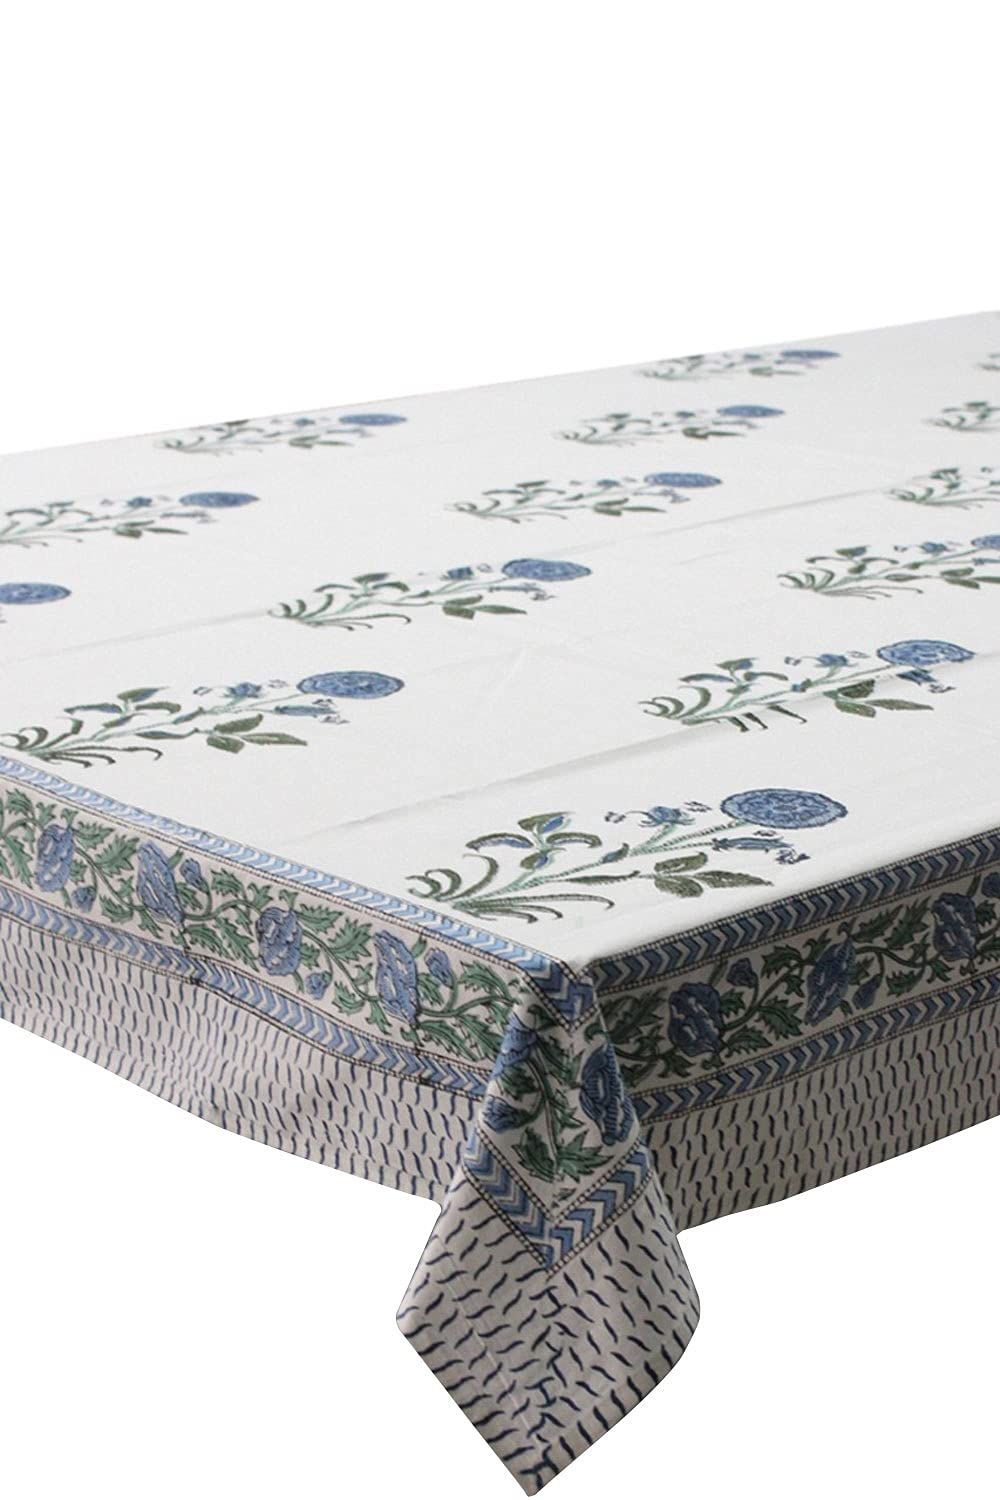 Indian Tablecloth Hand Block Print Cover 100%Cotton Floral White Color | Amazon (US)